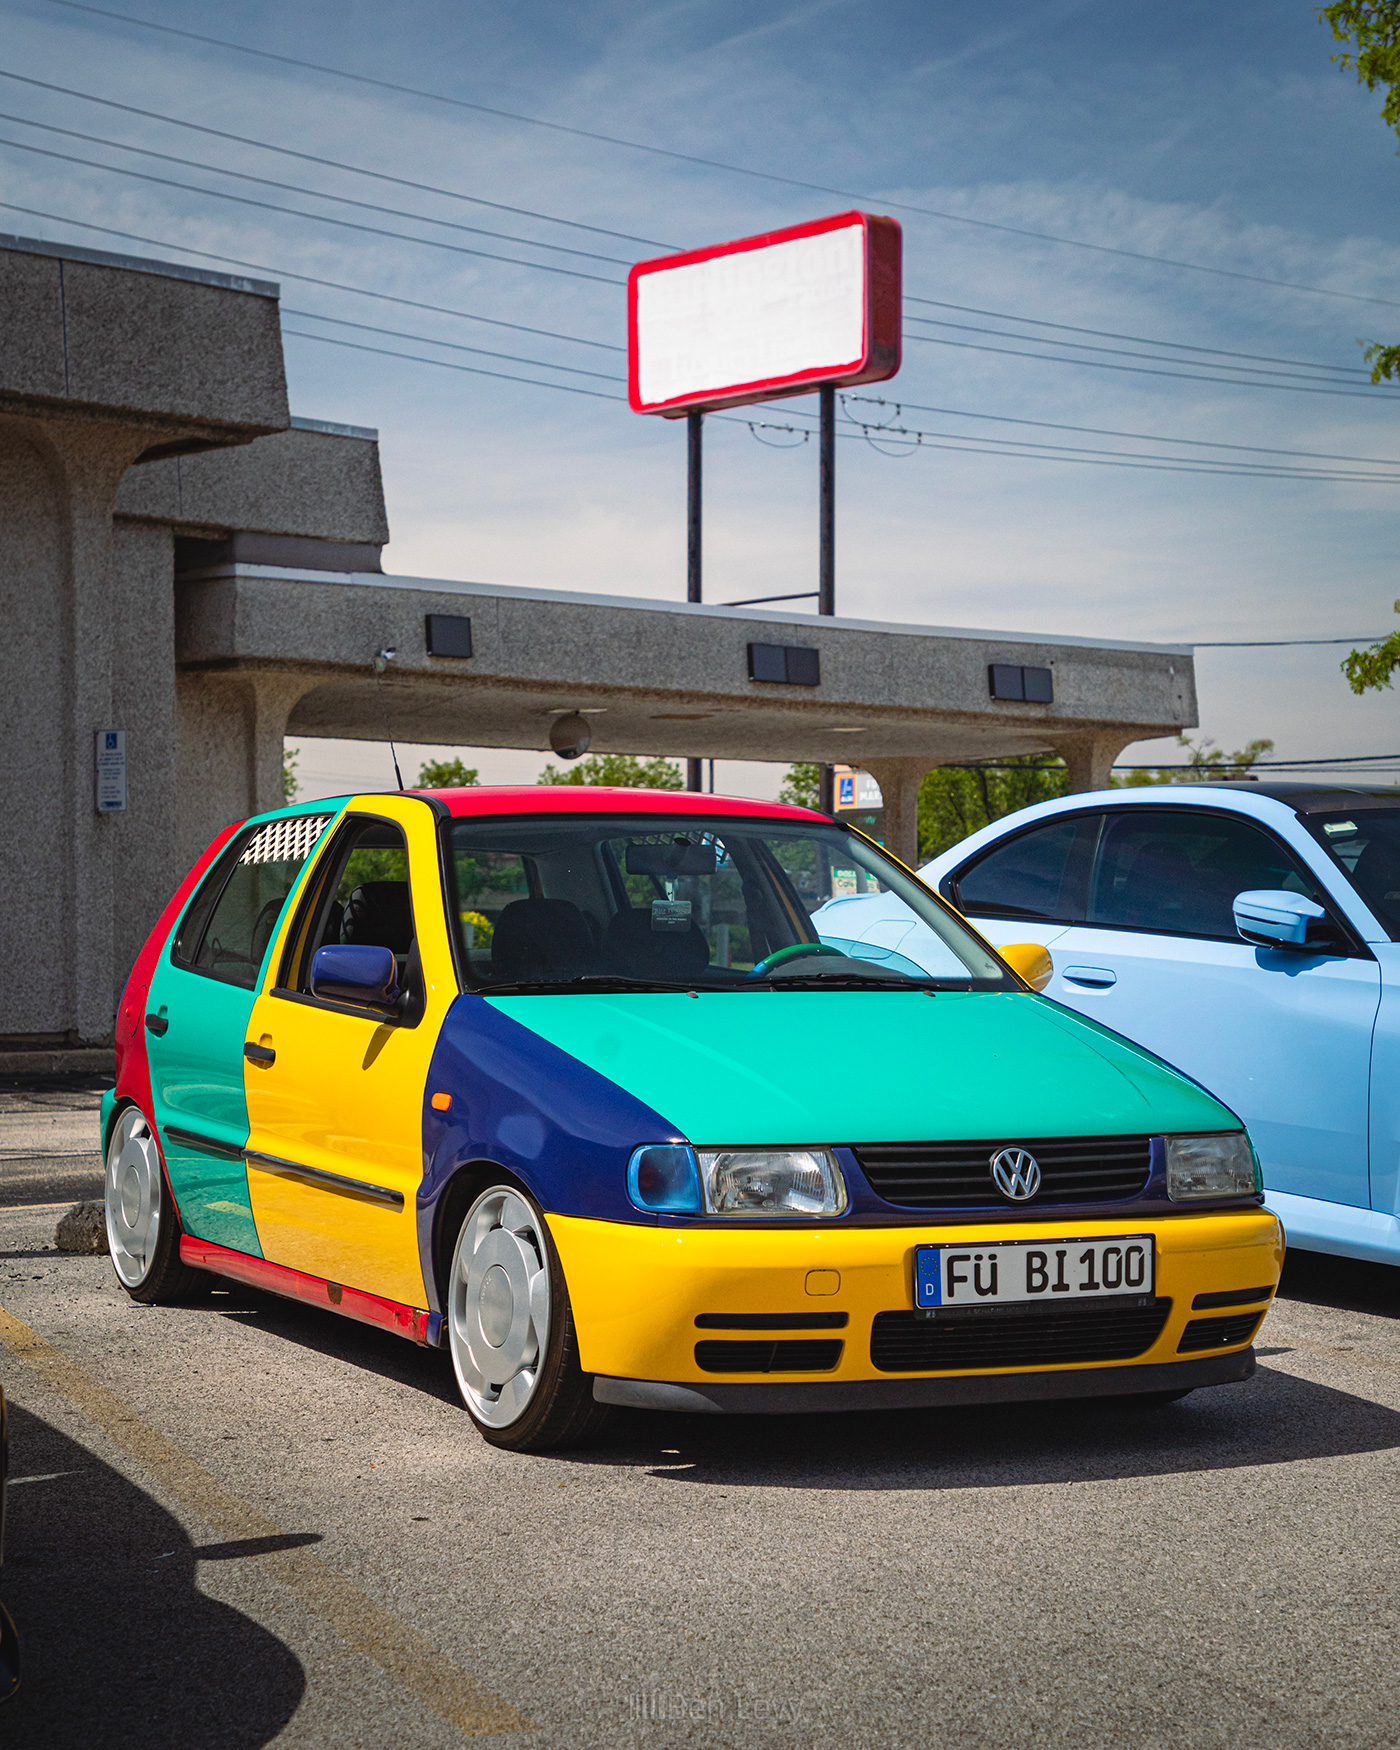 Volkswagen Polo Harlequin in the Chicago Suburbs